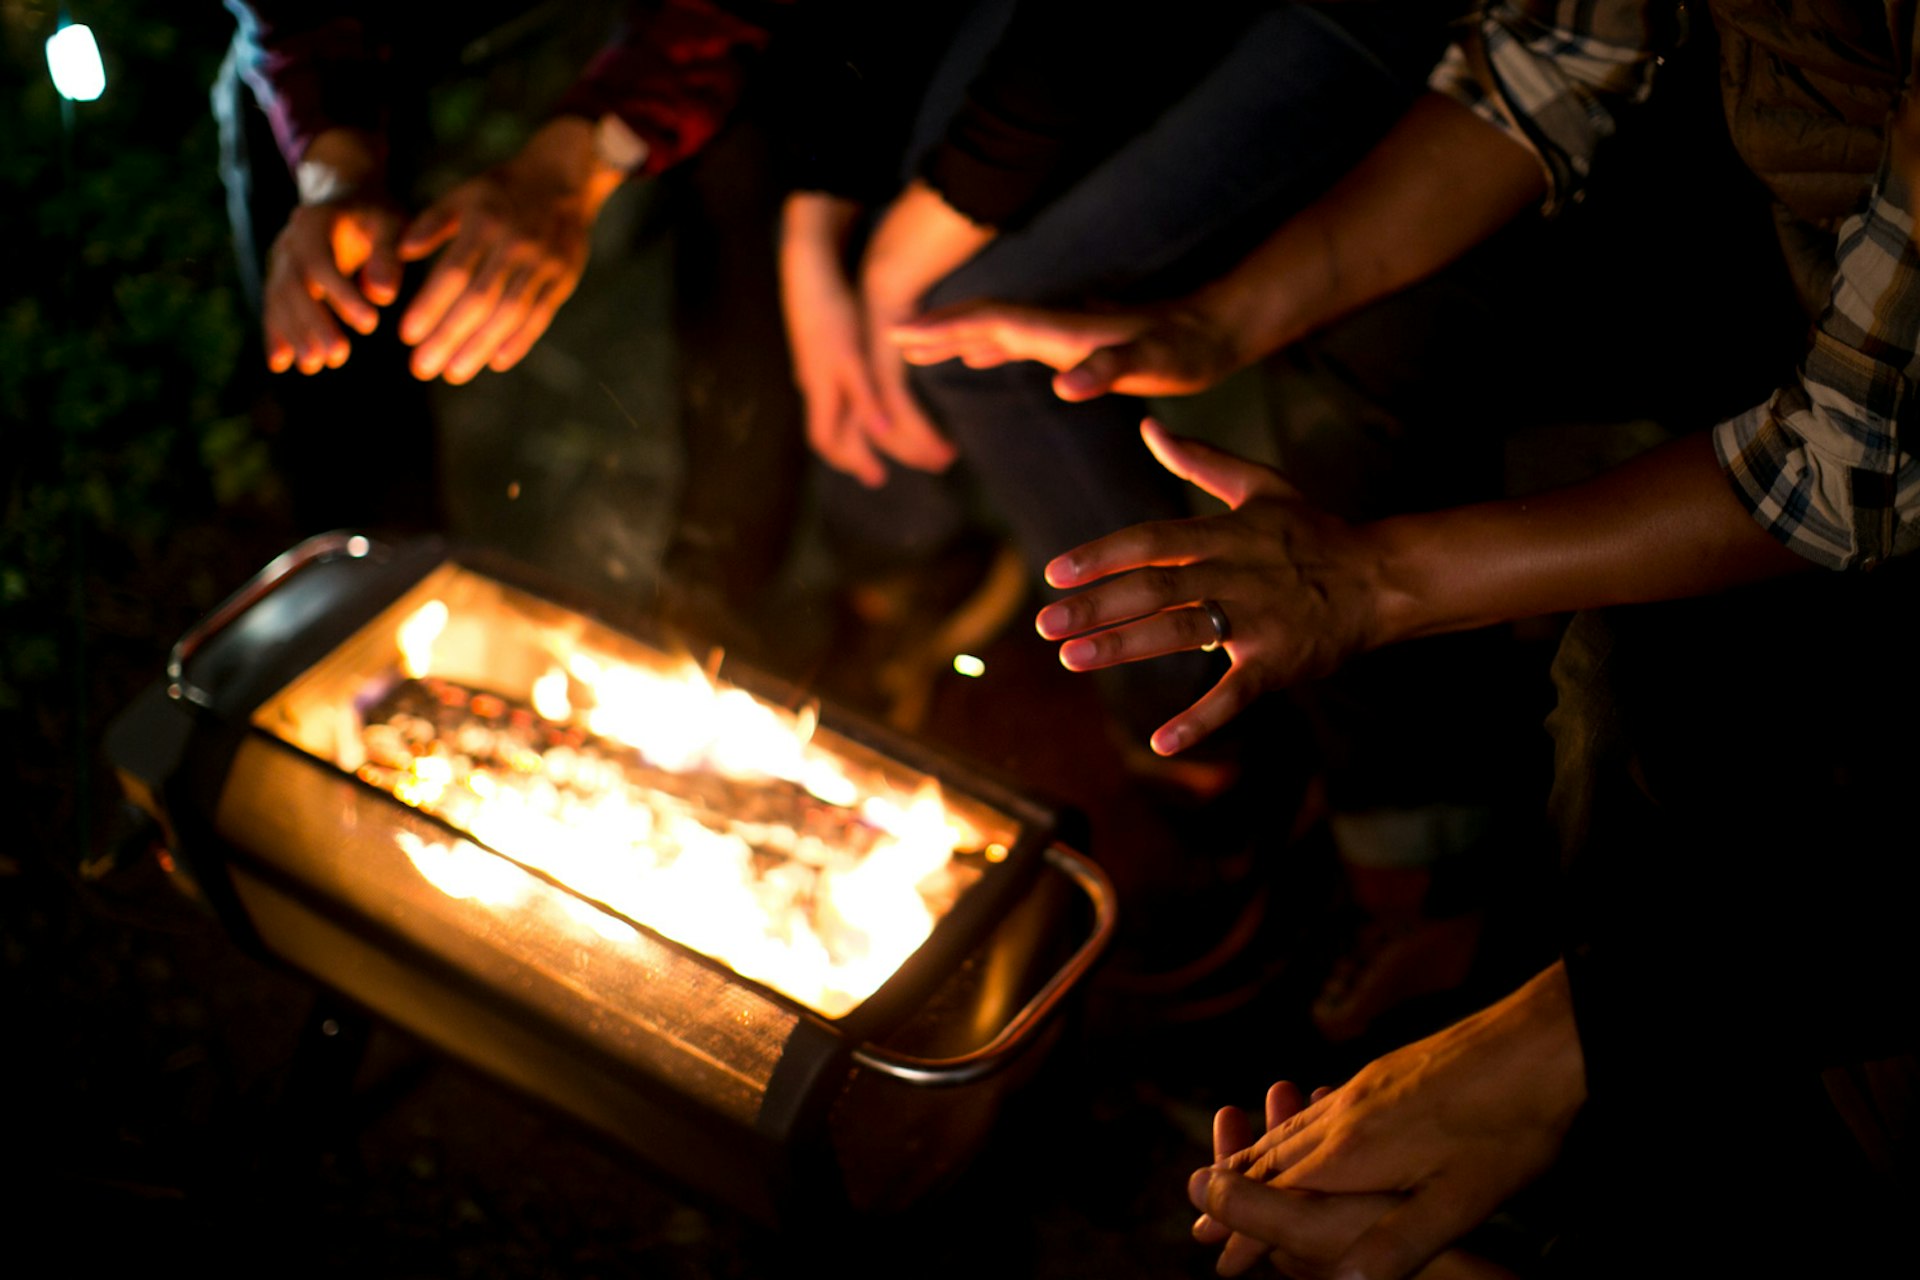 Warming hands over the BioLite FirePit. The image is taken at night and cropped so that we can only see the model's hands and forearms; Father's Day gifts